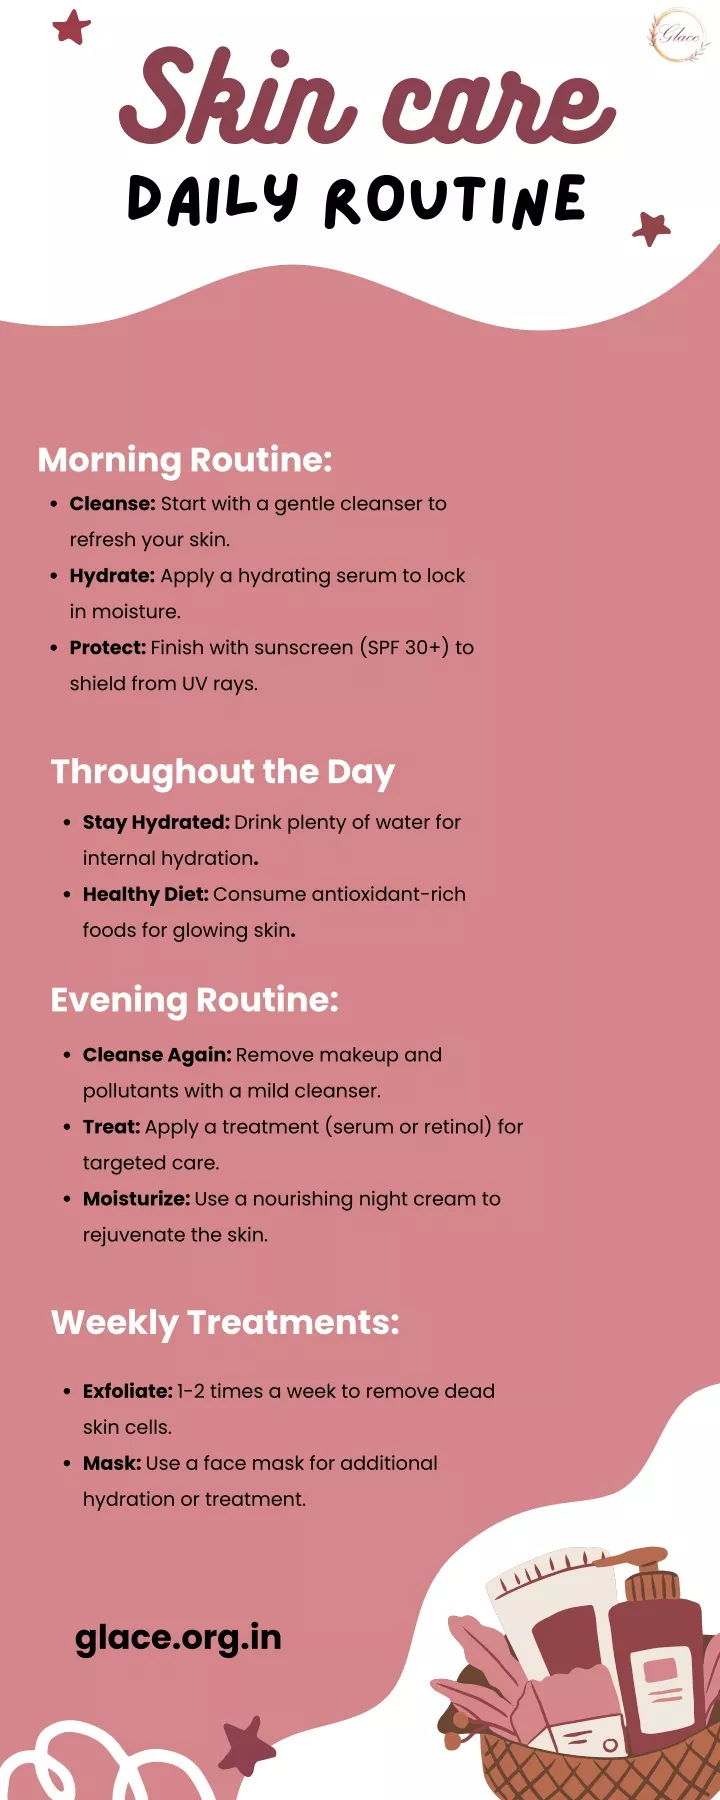 skin care daily routine